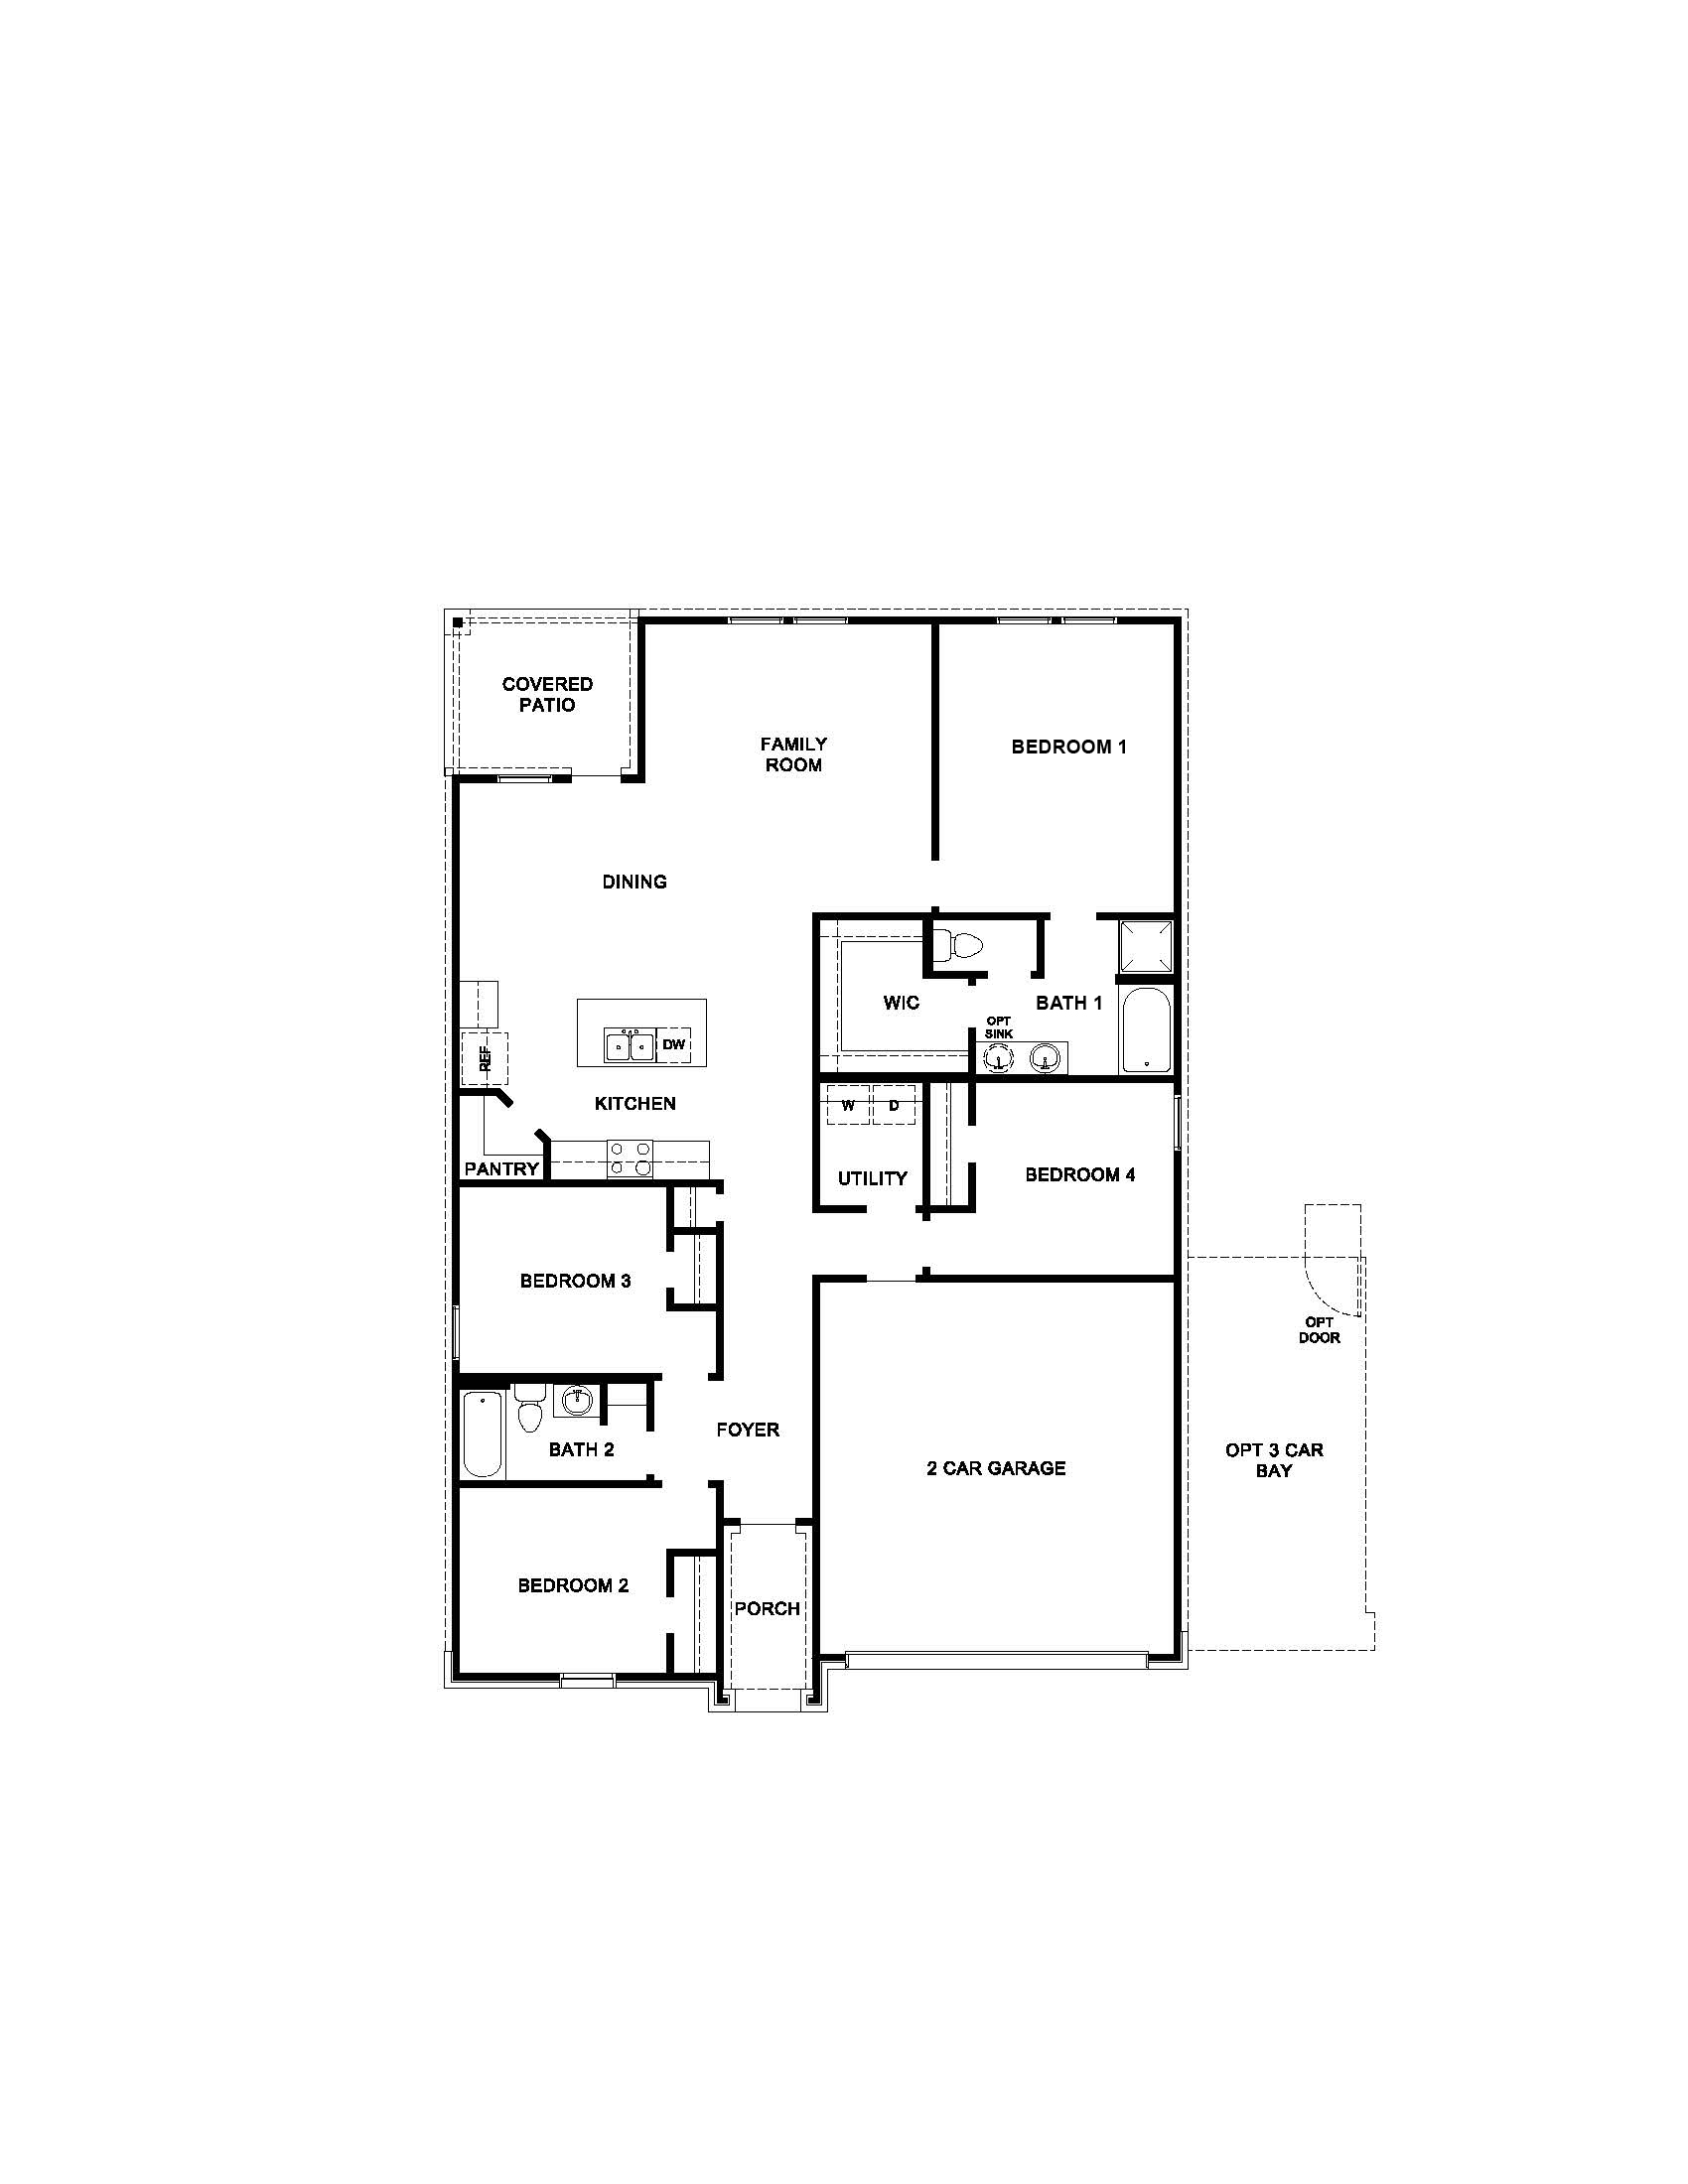 DR Horton Houston North Butlers Bend - E40G First Floor Plan